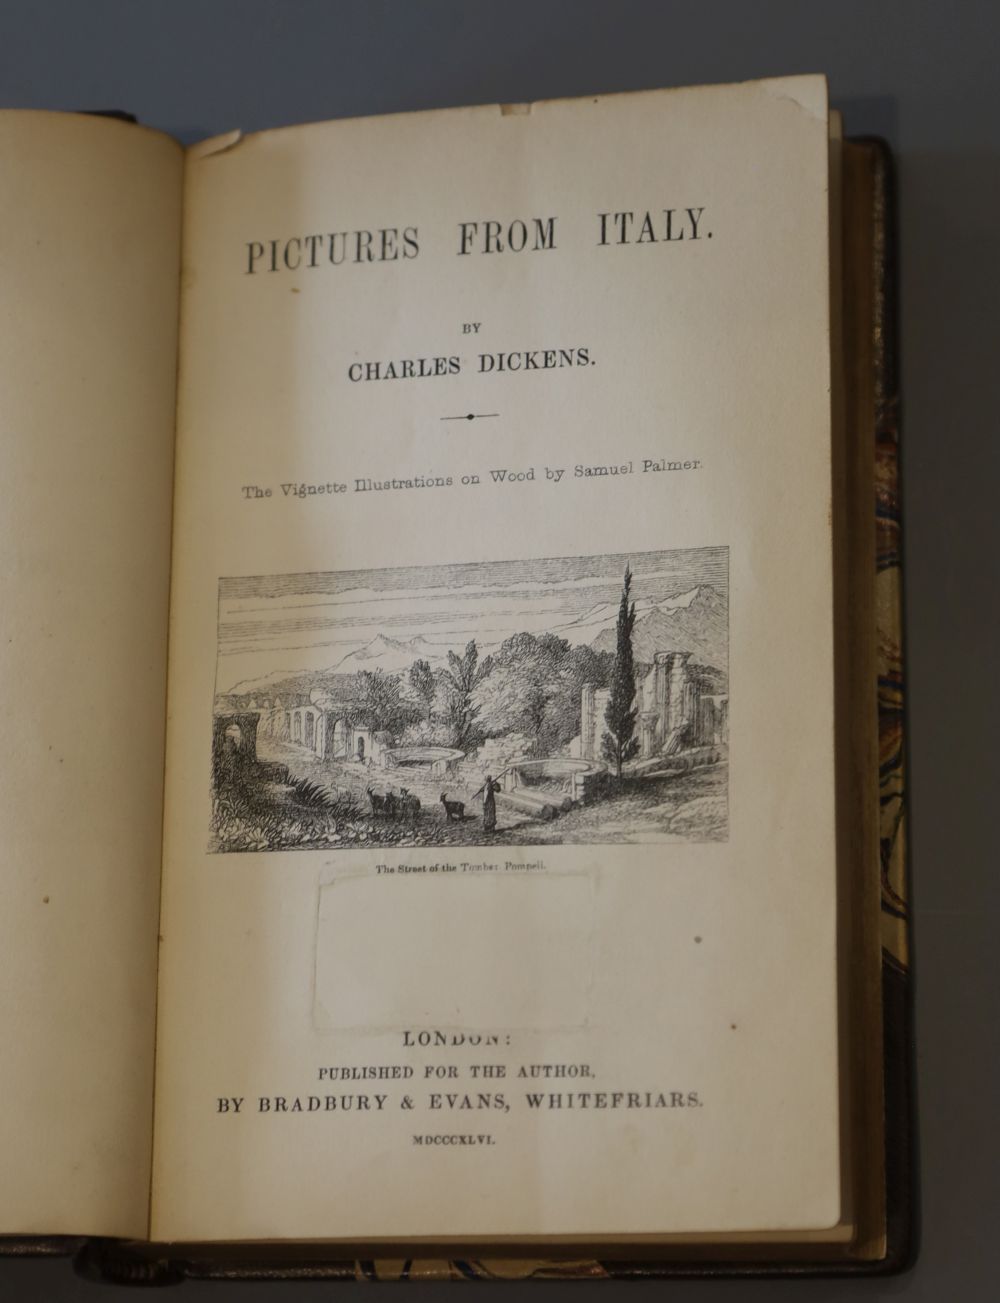 Dickens, Charles - Pictures from Italy, 1st edition, printed title (with engraved vignette illus.), and 3 other vignette illus. (by Sam